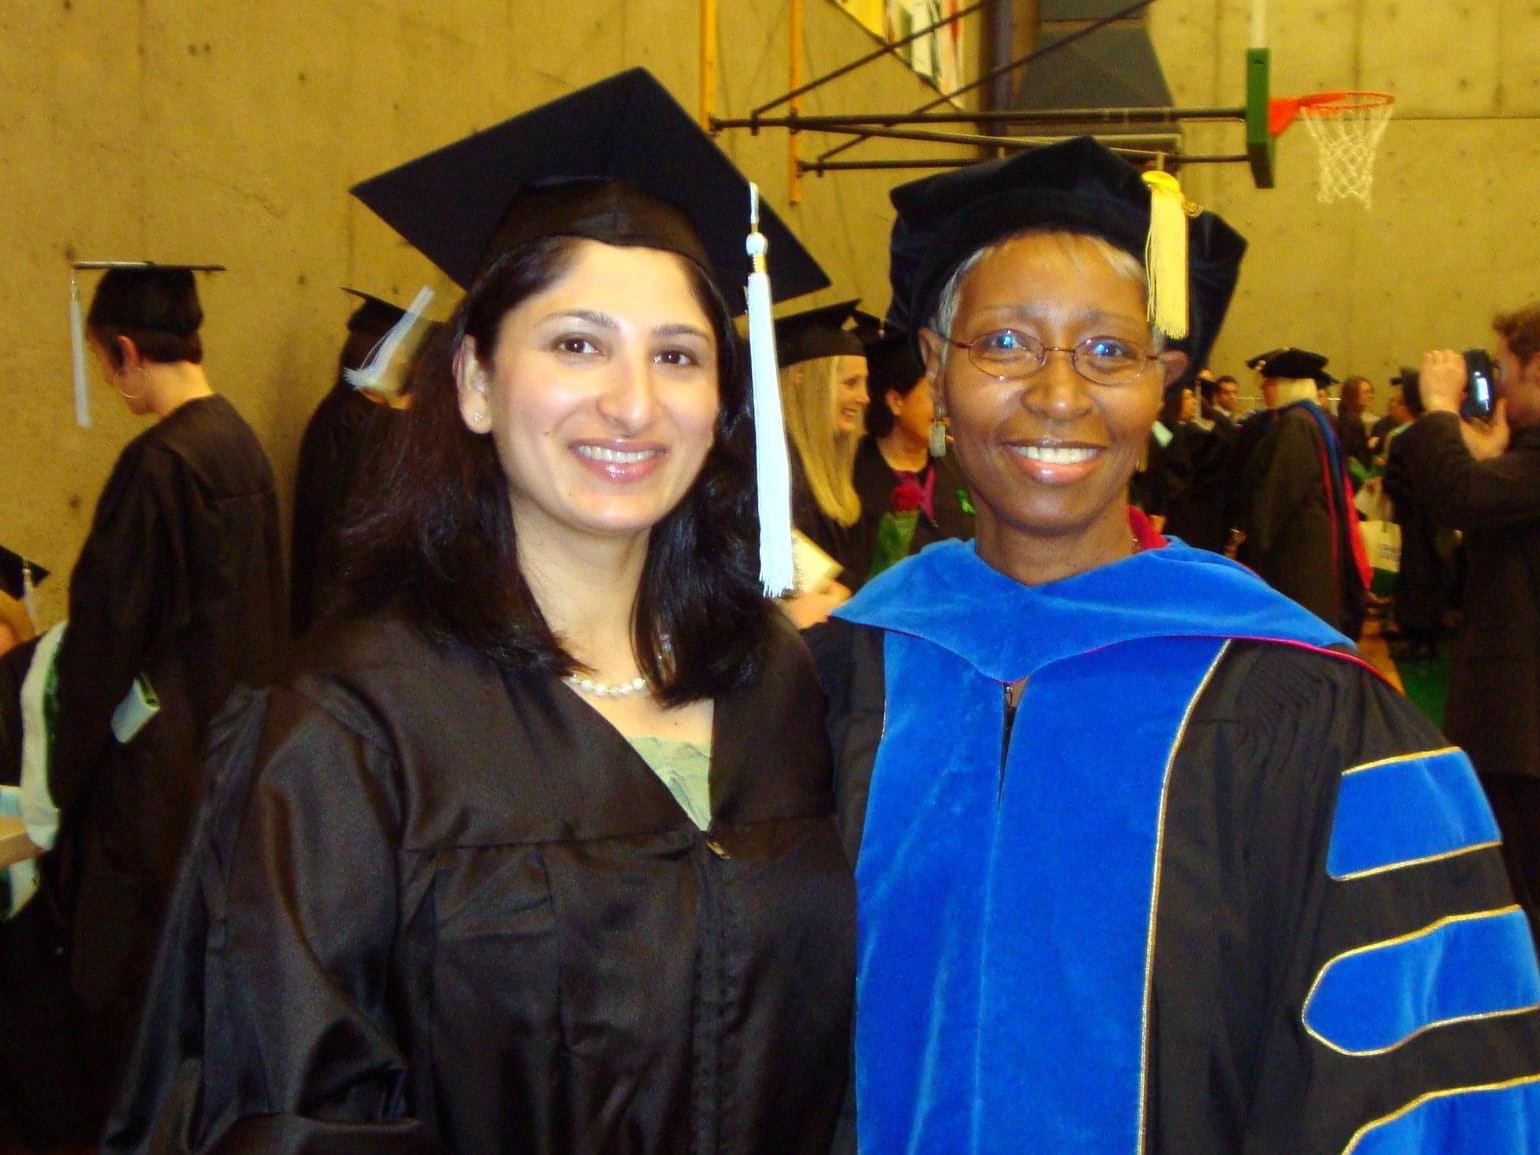 The image is of two people standing together and wearing graduation regalia, they are smiling for the camera. 